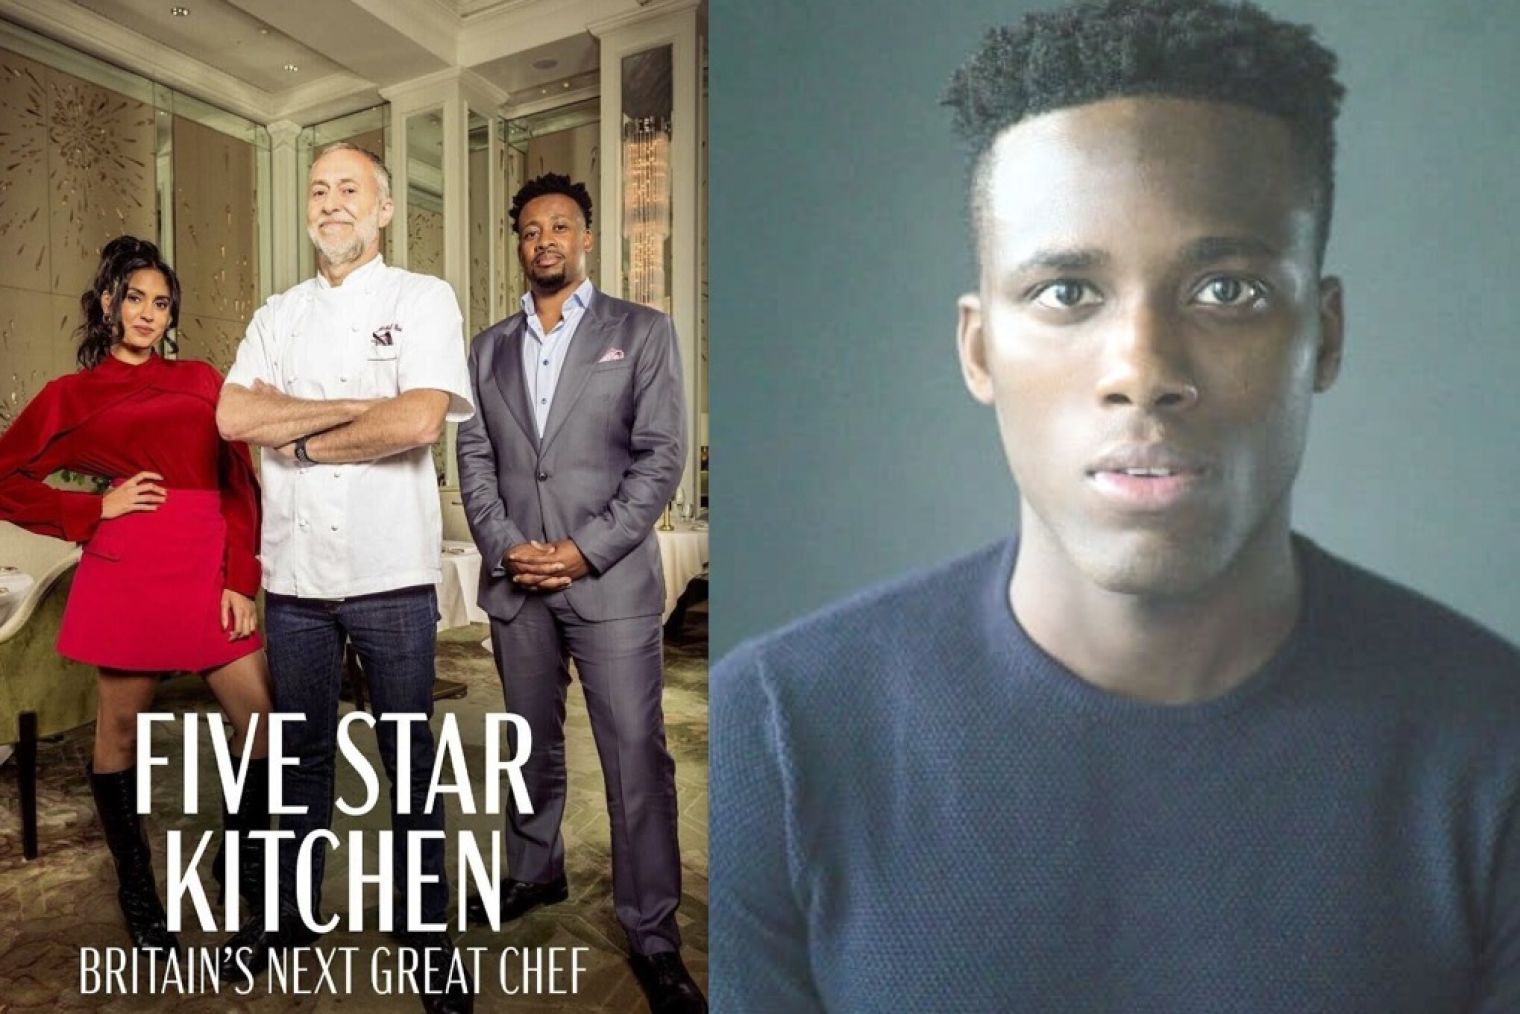 Bayo Gbadamosi narrates Channel 4's new cookery competition ‘Five Star Kitchen: Britain’s Next Great Chef’ which starts tonight at 8pm